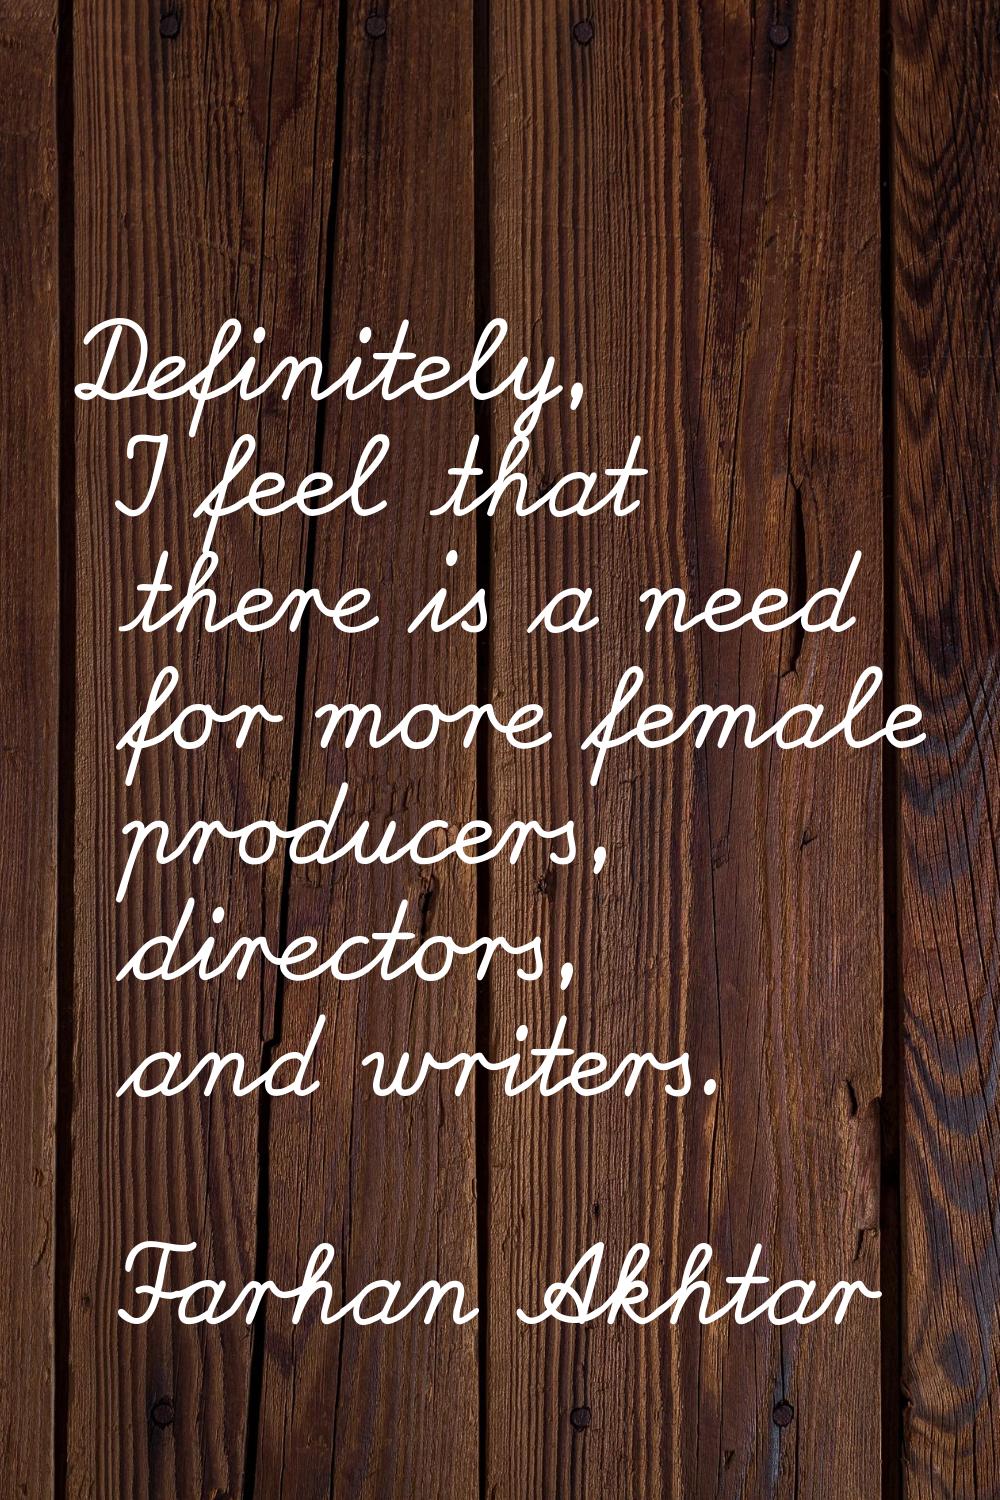 Definitely, I feel that there is a need for more female producers, directors, and writers.